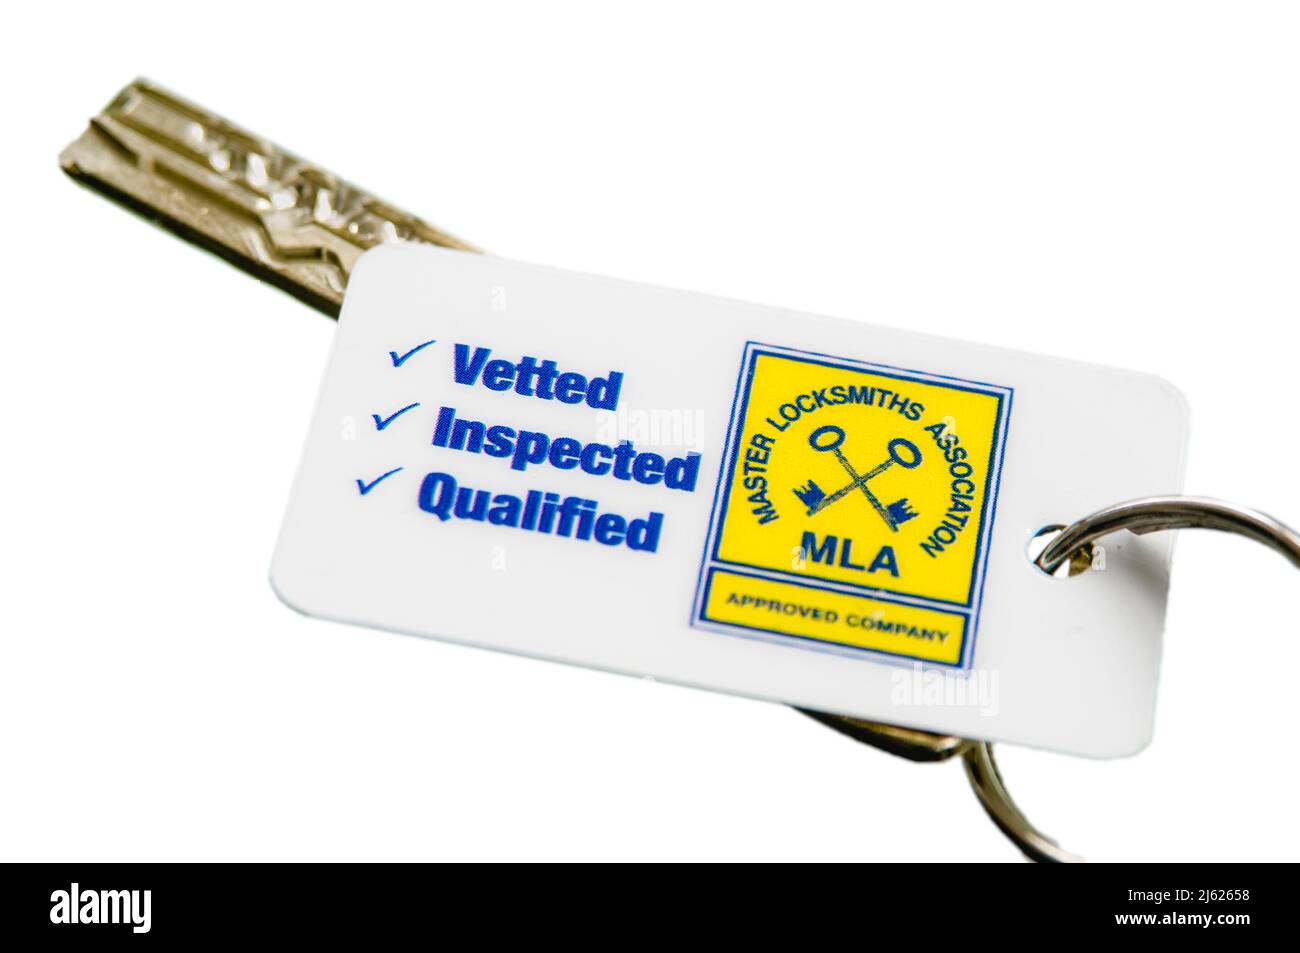 High security key from the Master Locksmiths Association Stock Photo